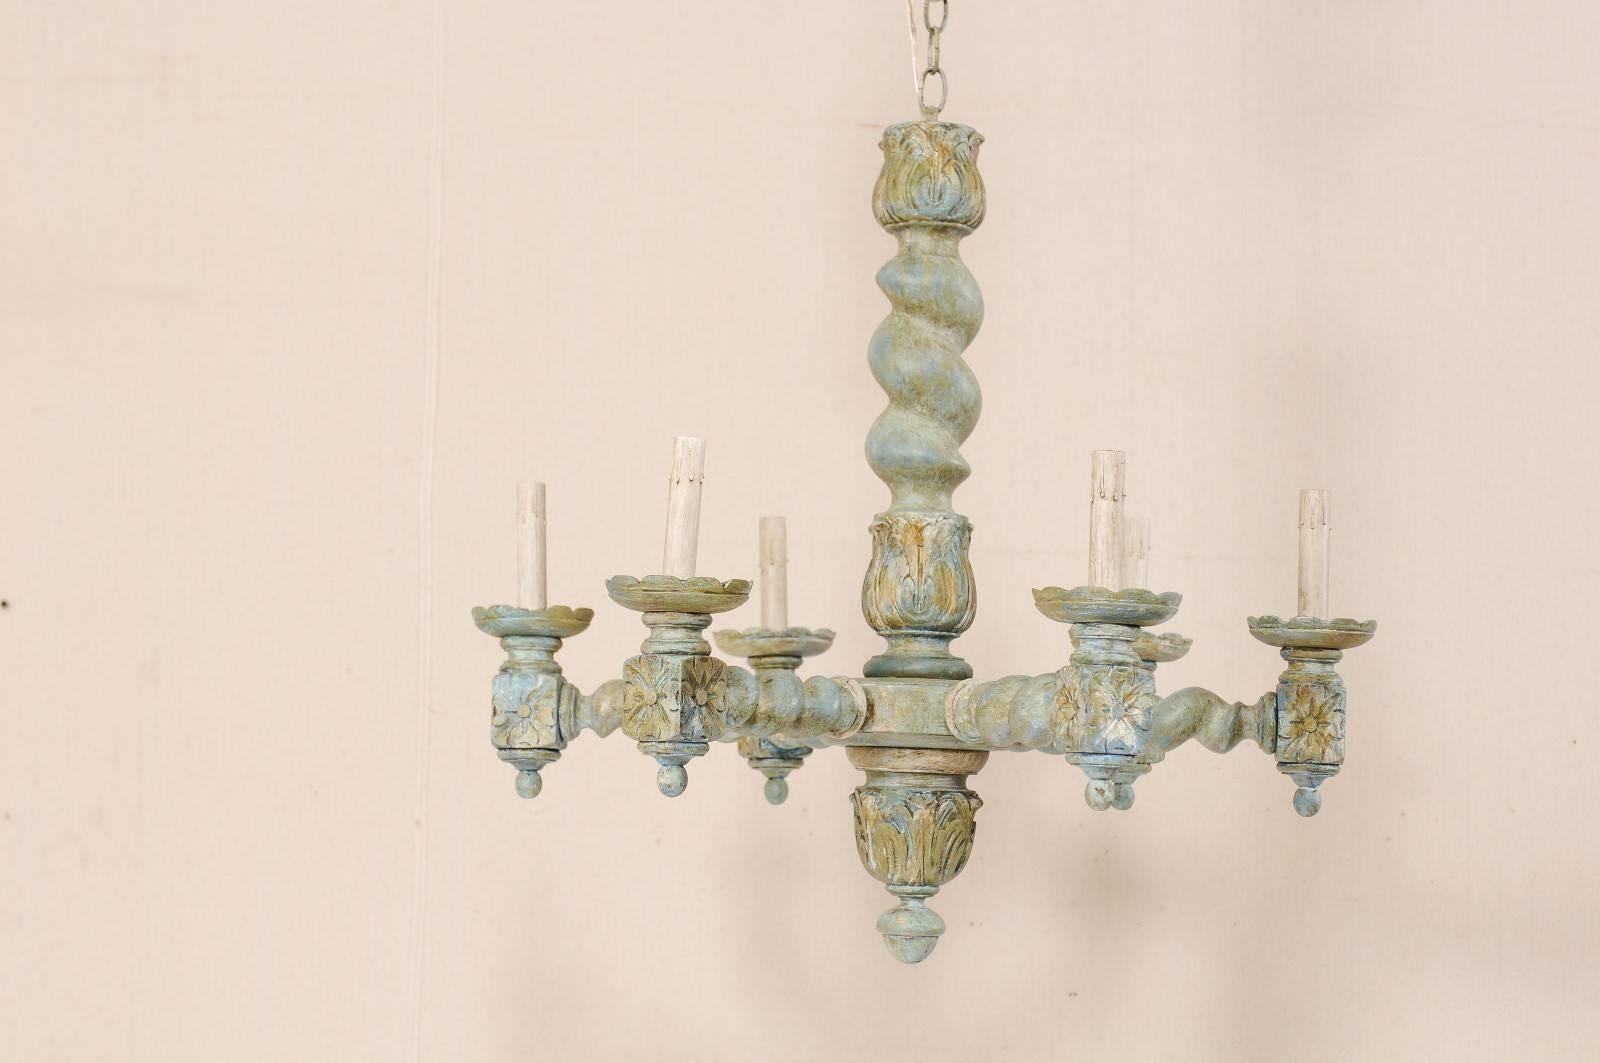 Carved French Six-Light Barley Twist Wood Chandelier in Painted Tones of Blue and Cream